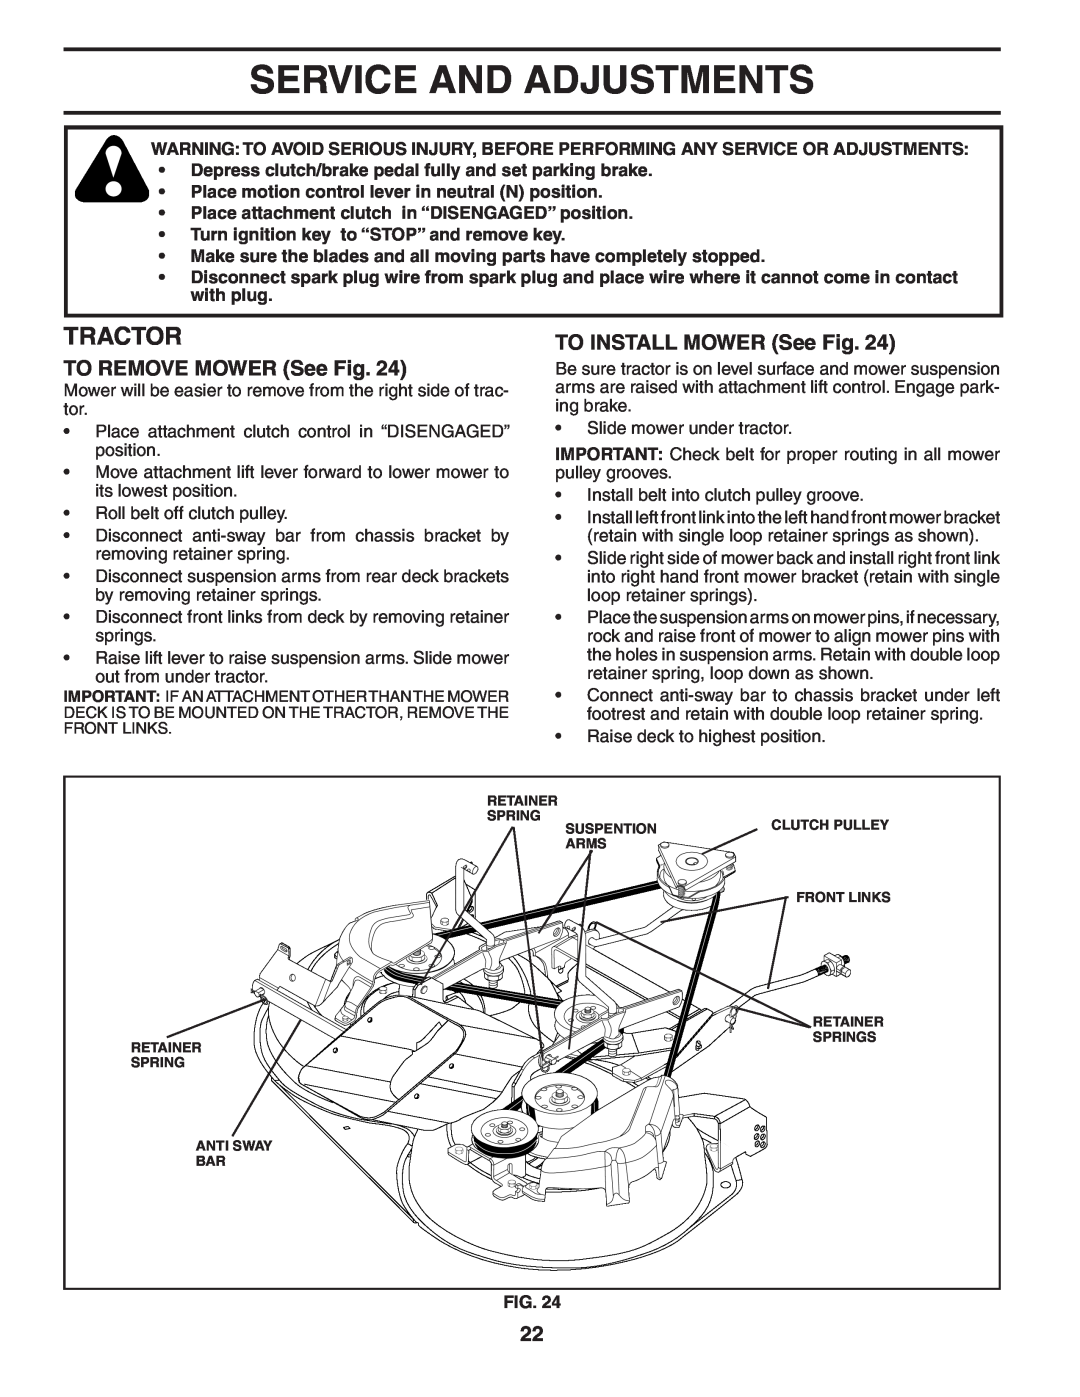 Husqvarna CTH180 XP owner manual Service And Adjustments, TO REMOVE MOWER See Fig, TO INSTALL MOWER See Fig, Tractor 